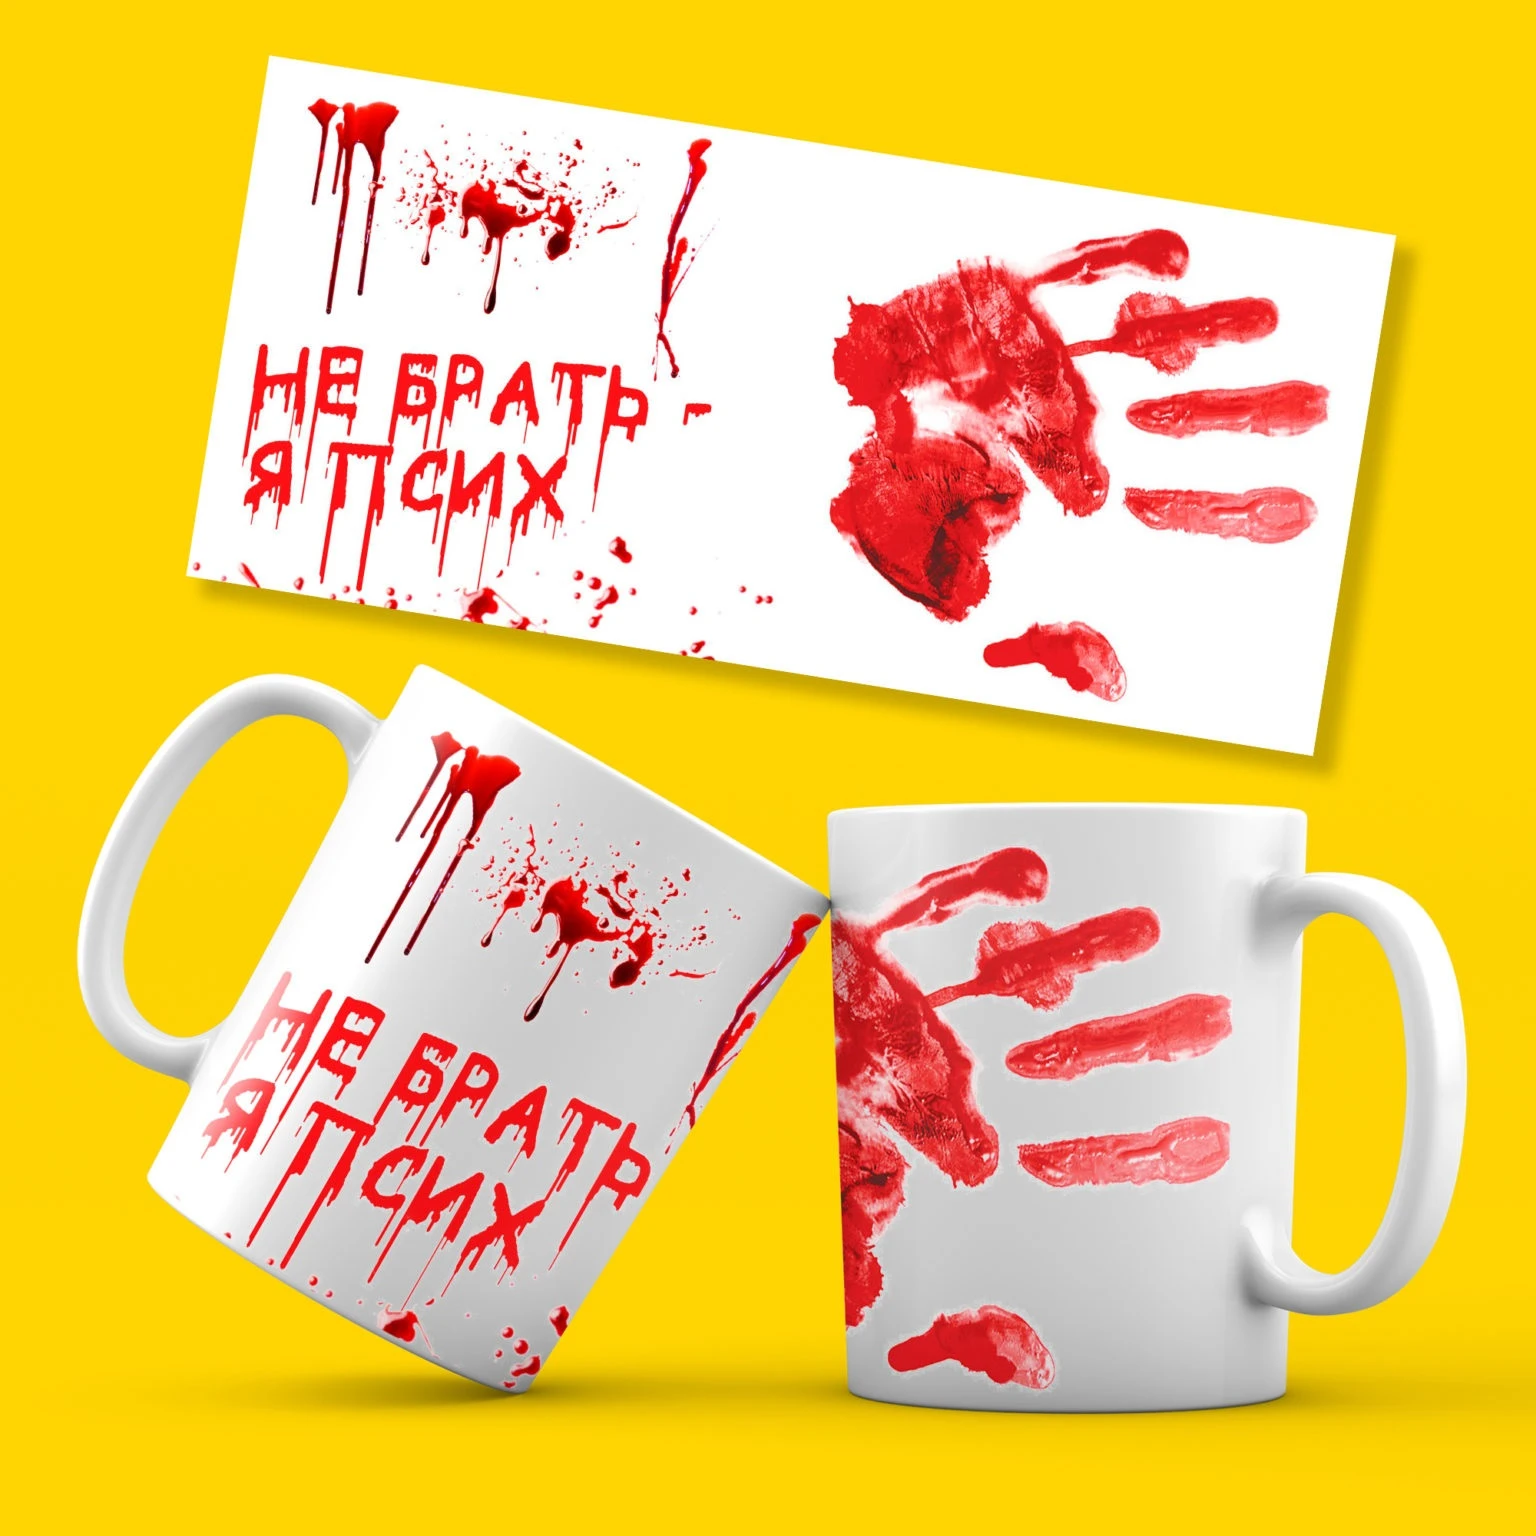 Ceramic mug do not take I crazy funny mugs for children as a gift decal on the Cup crazy pattern cool print squid game игра в кальмара